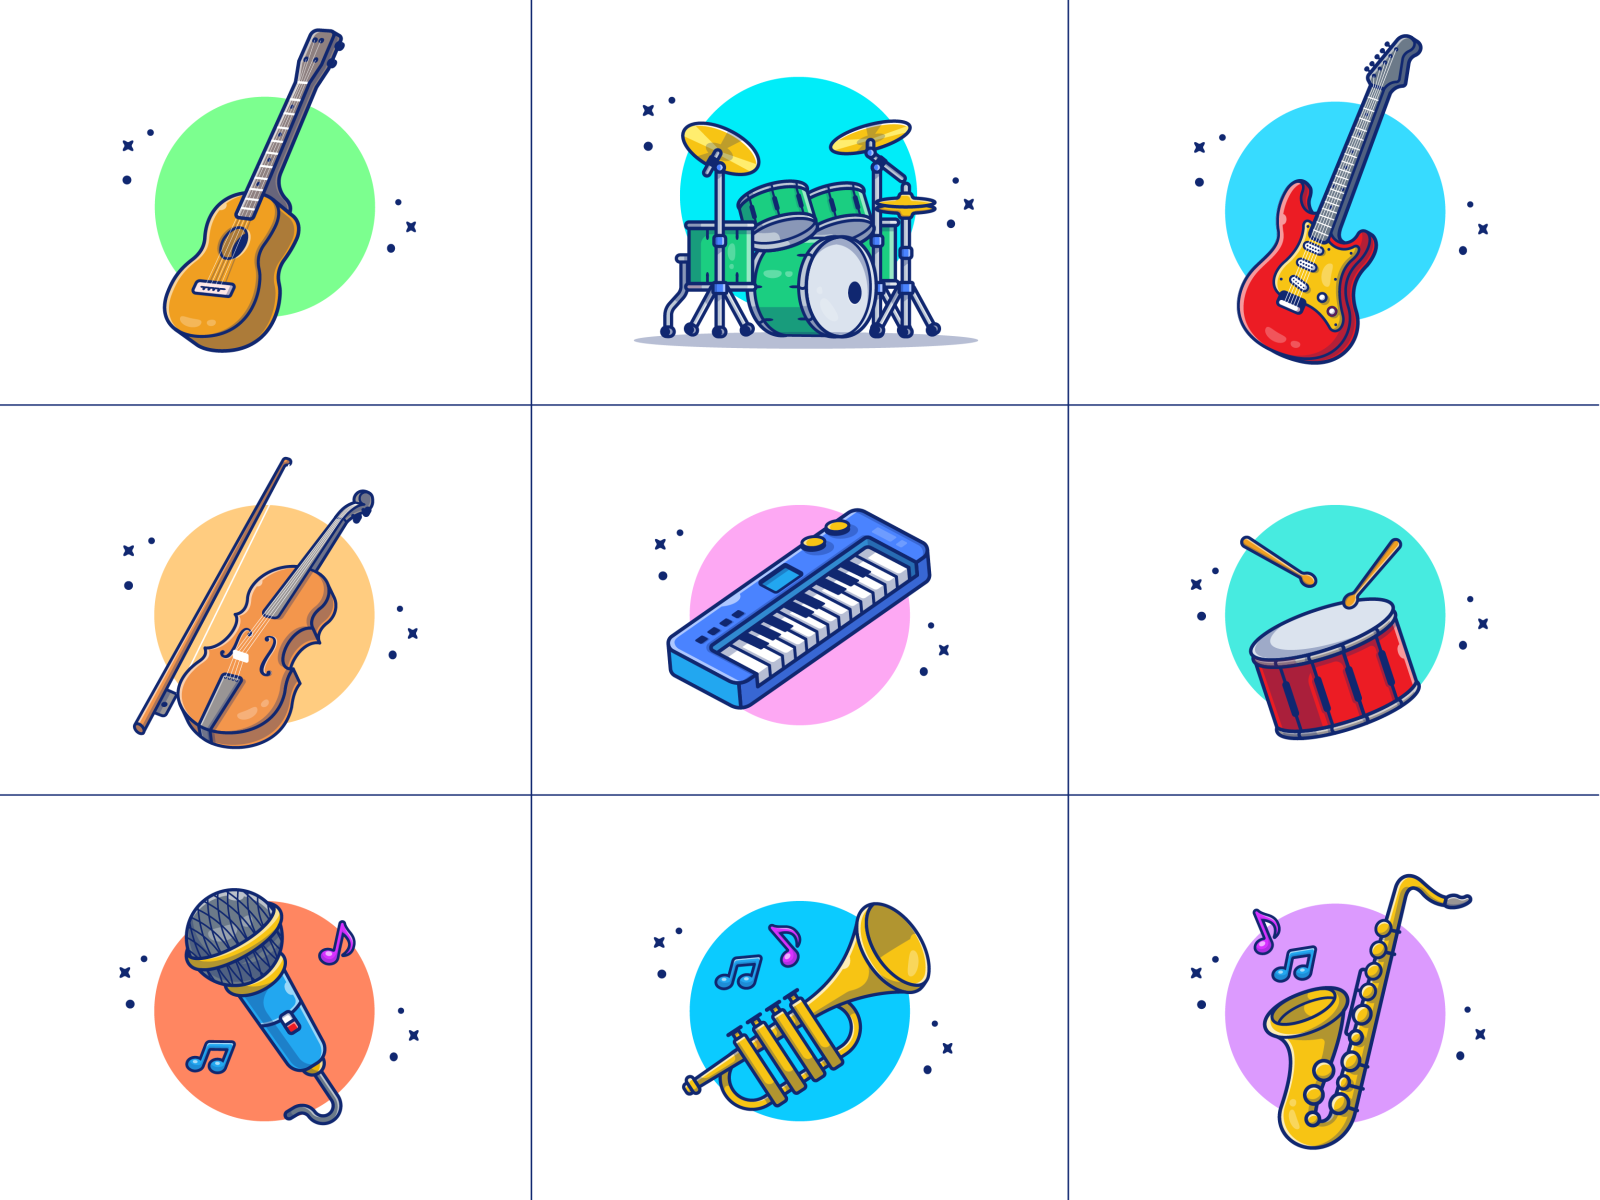 music instruments... 🎵🎶🎹🎤🎺🎻🎷🎸🥁 concert cartoon logo icon illustration player musical trumpet violin piano drum song sing sound electric accoustic guitar microphone intrument music